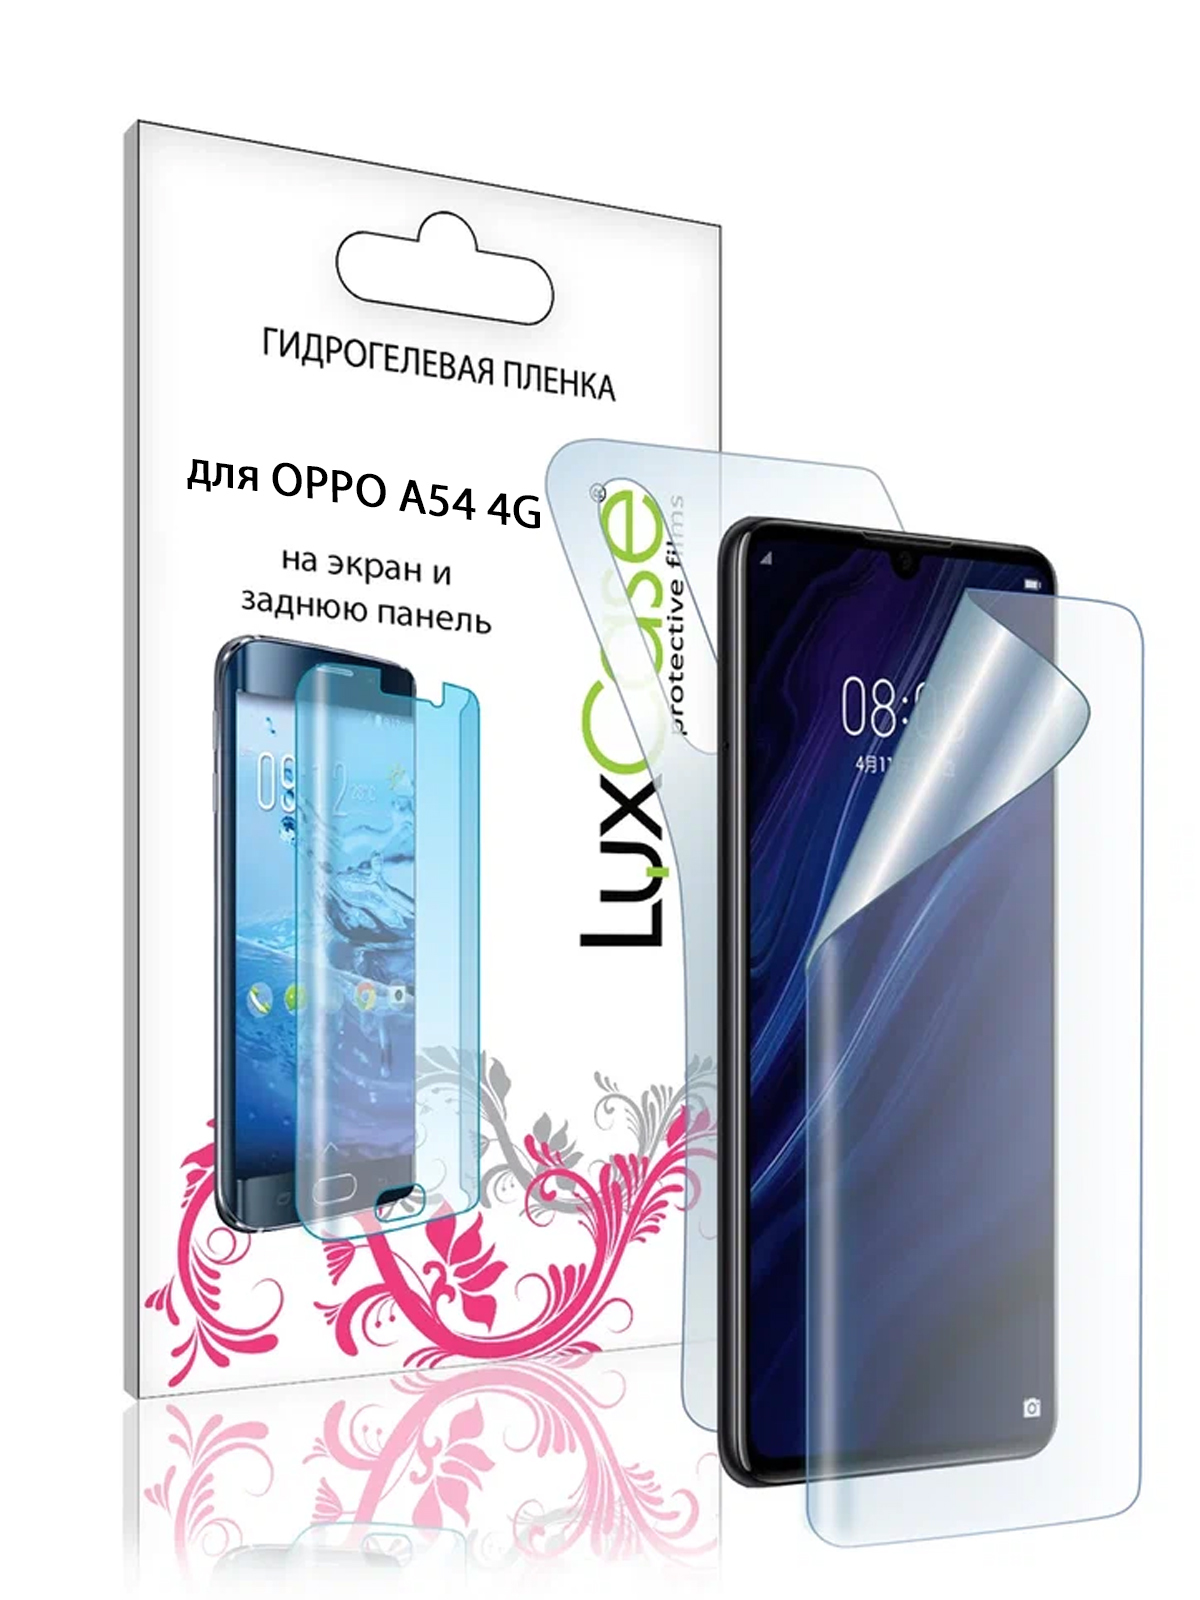 Пленка гидрогелевая LuxCase для Oppo A54 Front and Back Transparent 86397 пленка гидрогелевая luxcase для nokia g20 front and back transparent 86394